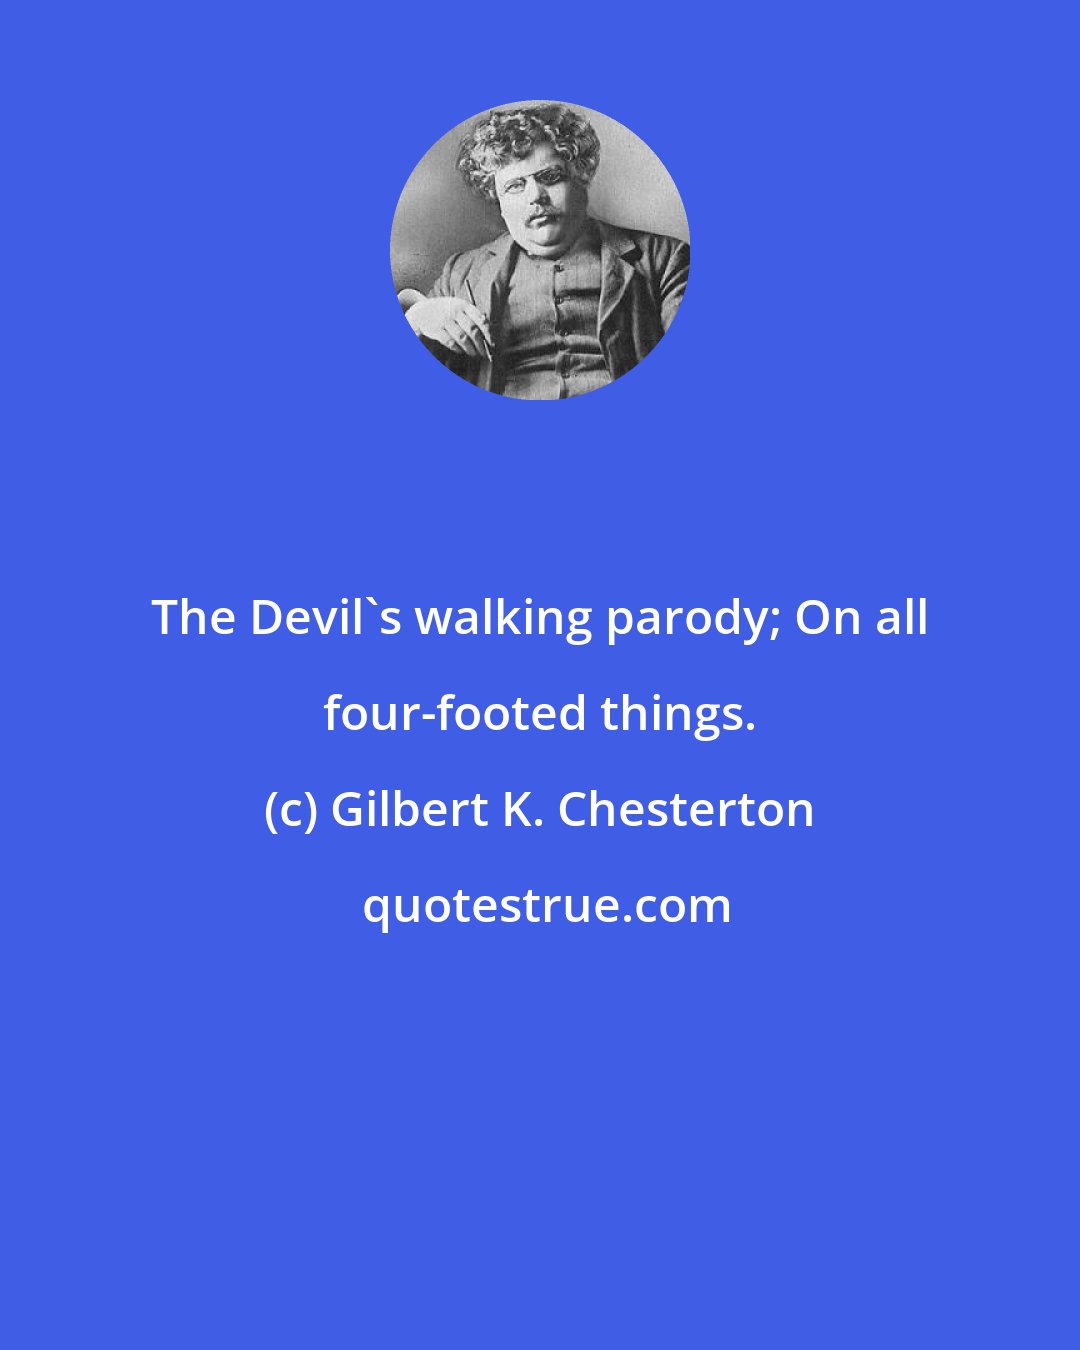 Gilbert K. Chesterton: The Devil's walking parody; On all four-footed things.